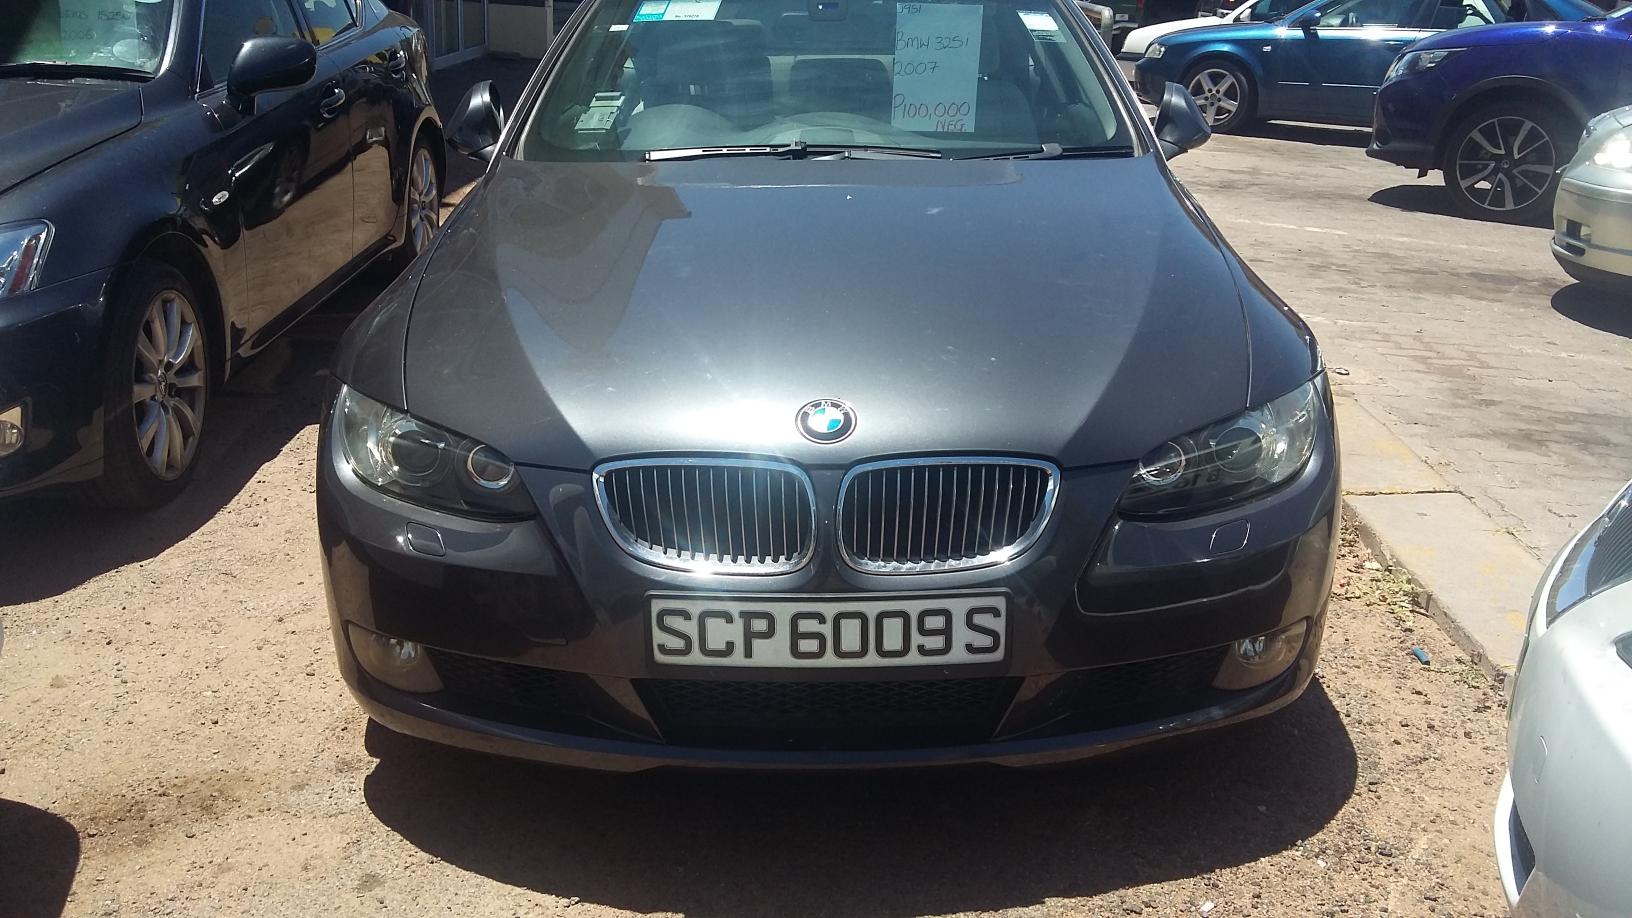 BMW 325i in Botswana - Local Used BMW for sale in Gaborone - Buy BMW